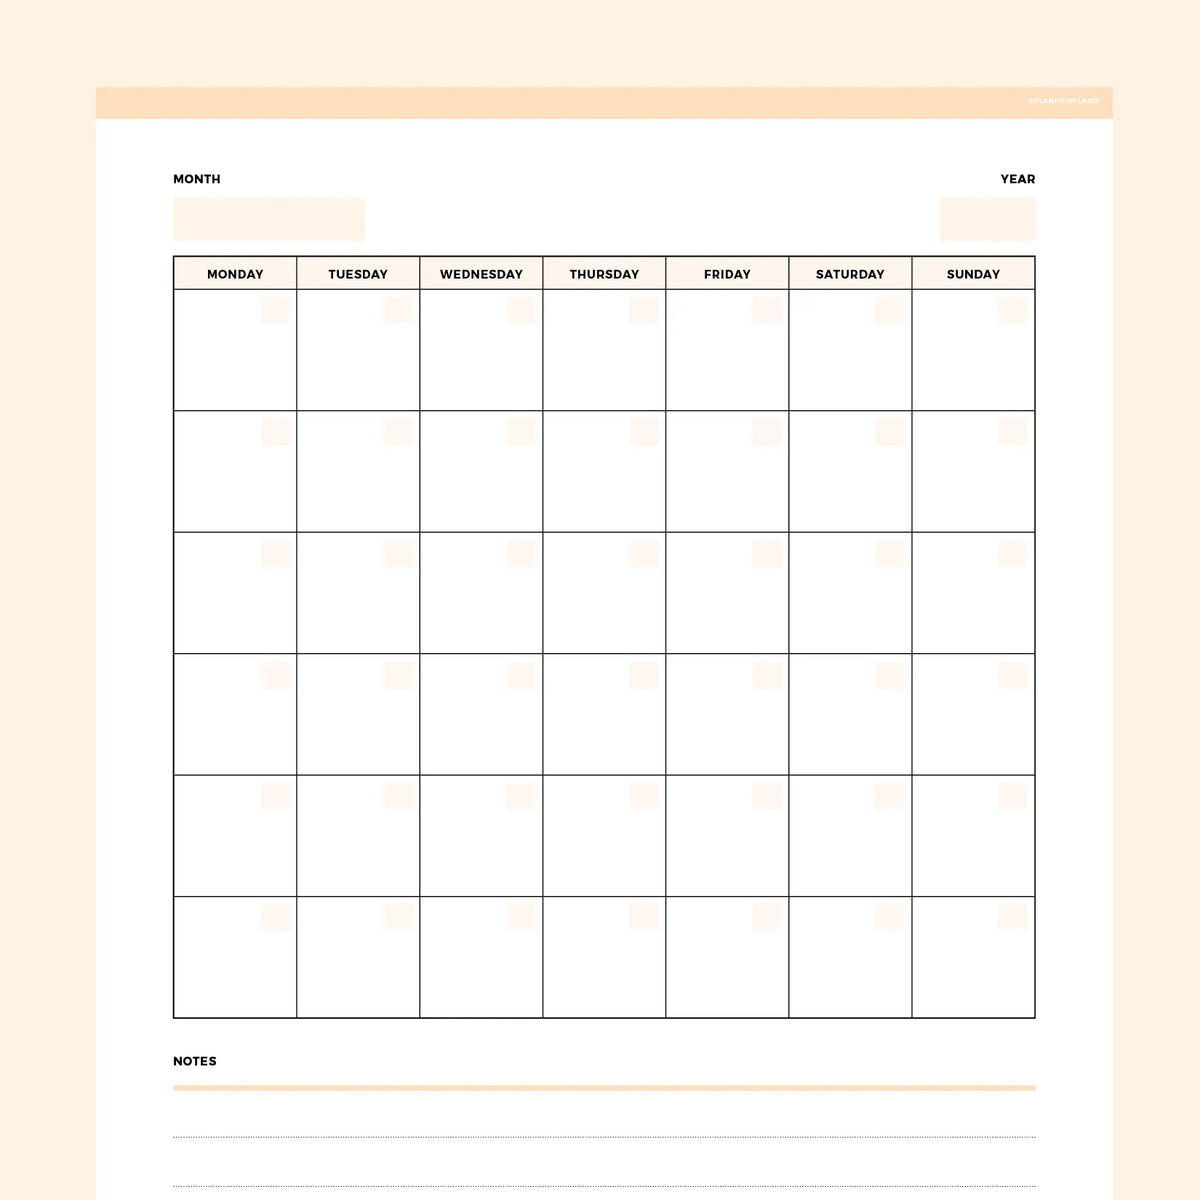 monthly schedule printable